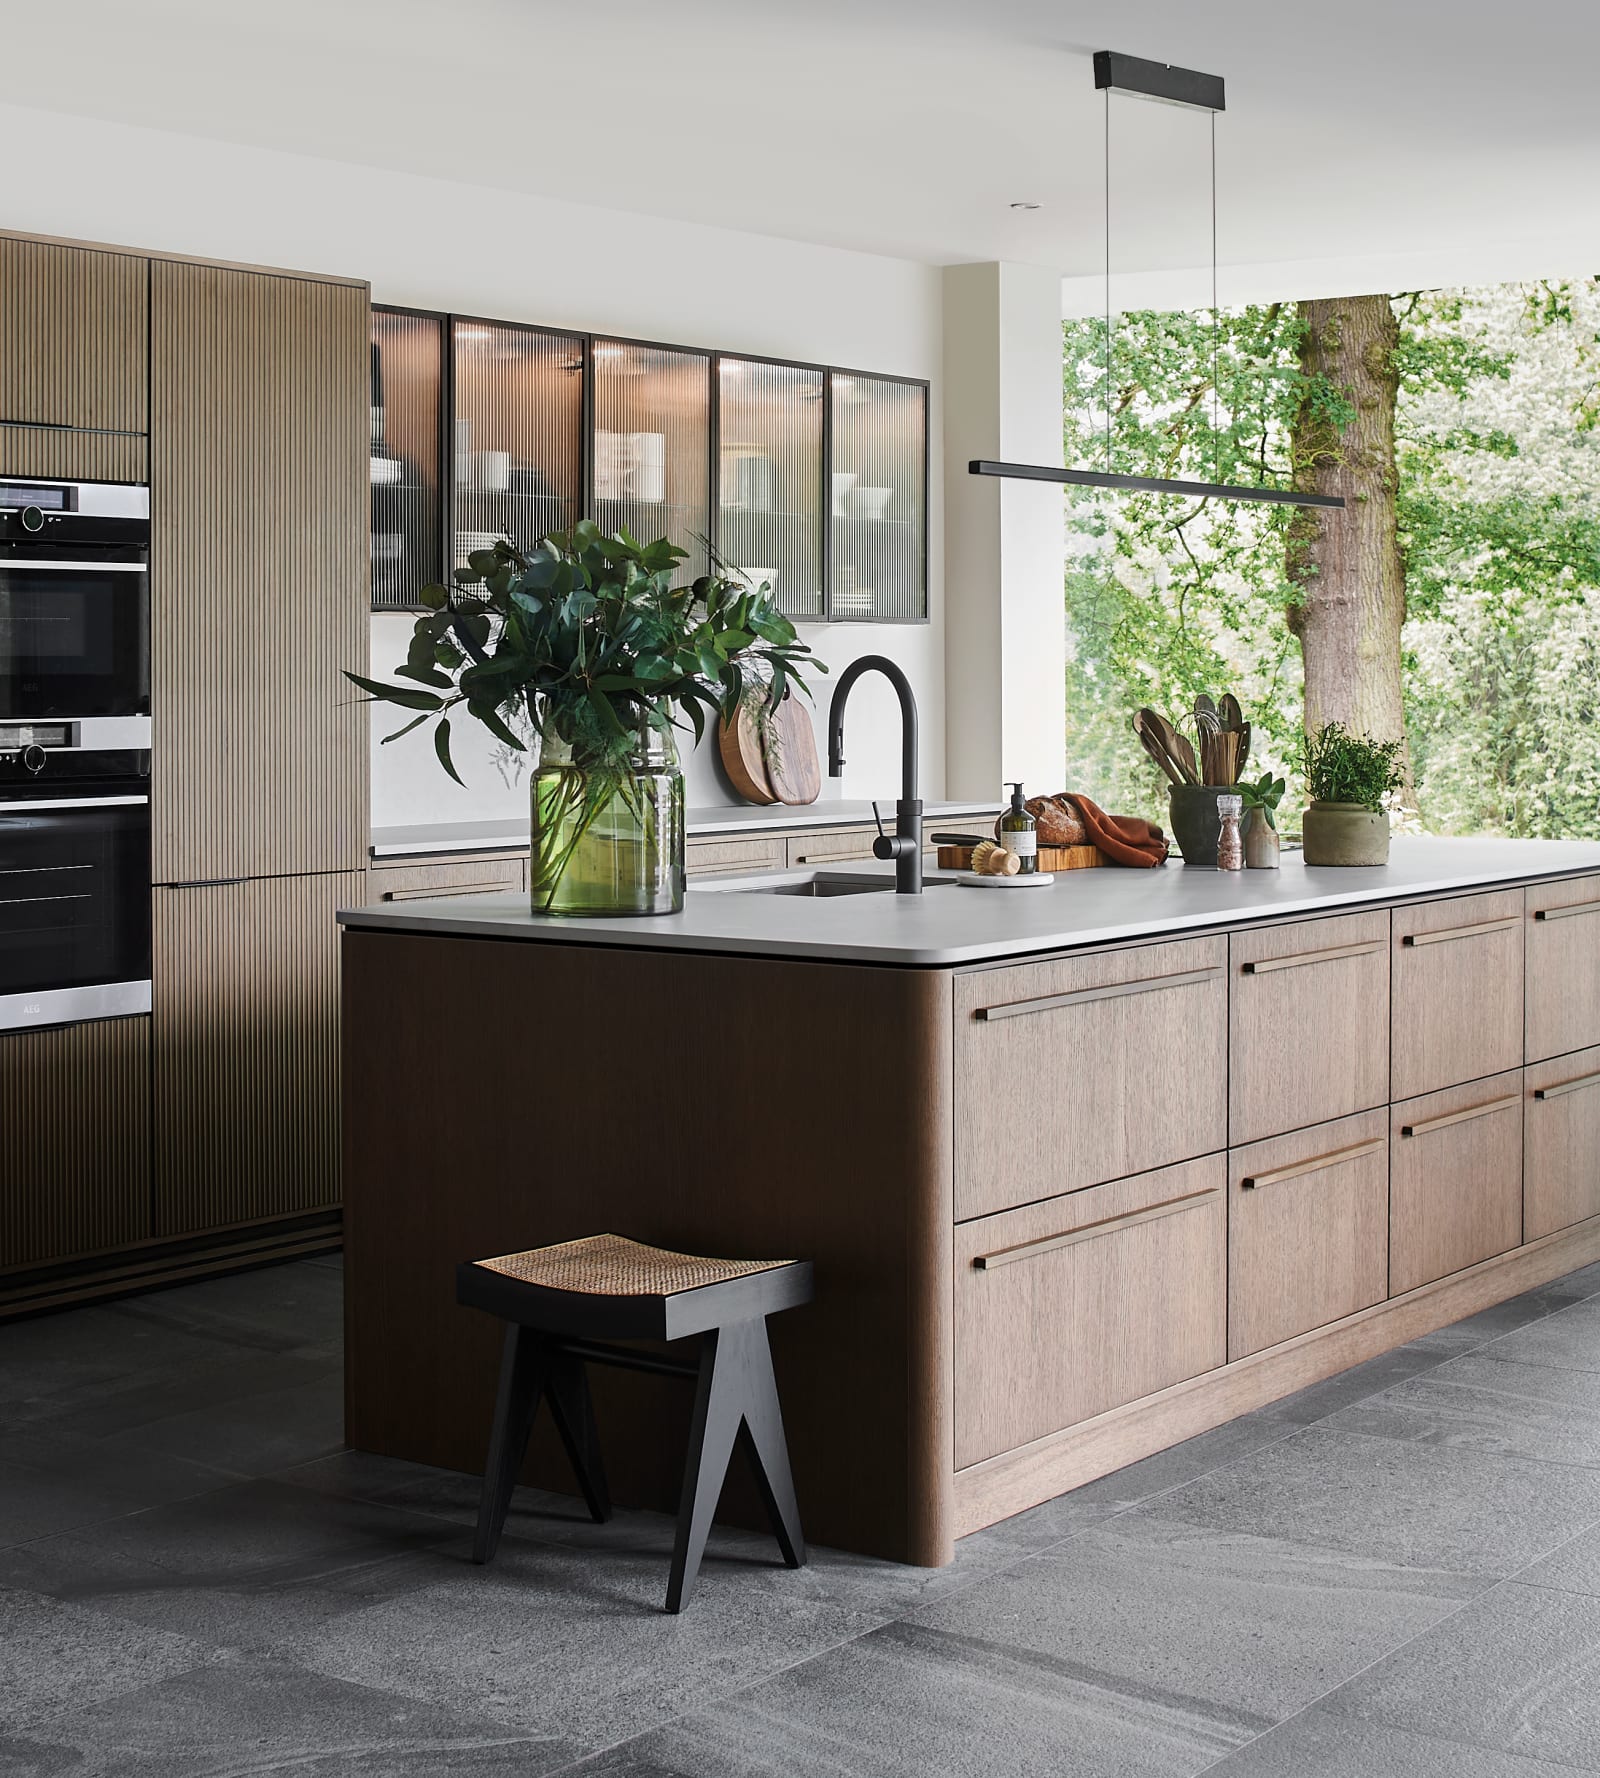 Magnet Kitchens 2021 Nordic Nature range with Fluted oak doors and Integra Hoxton Pebble cabinets with Dekton Aeri worktop. U-shaped kitchen with breakfast bar area.